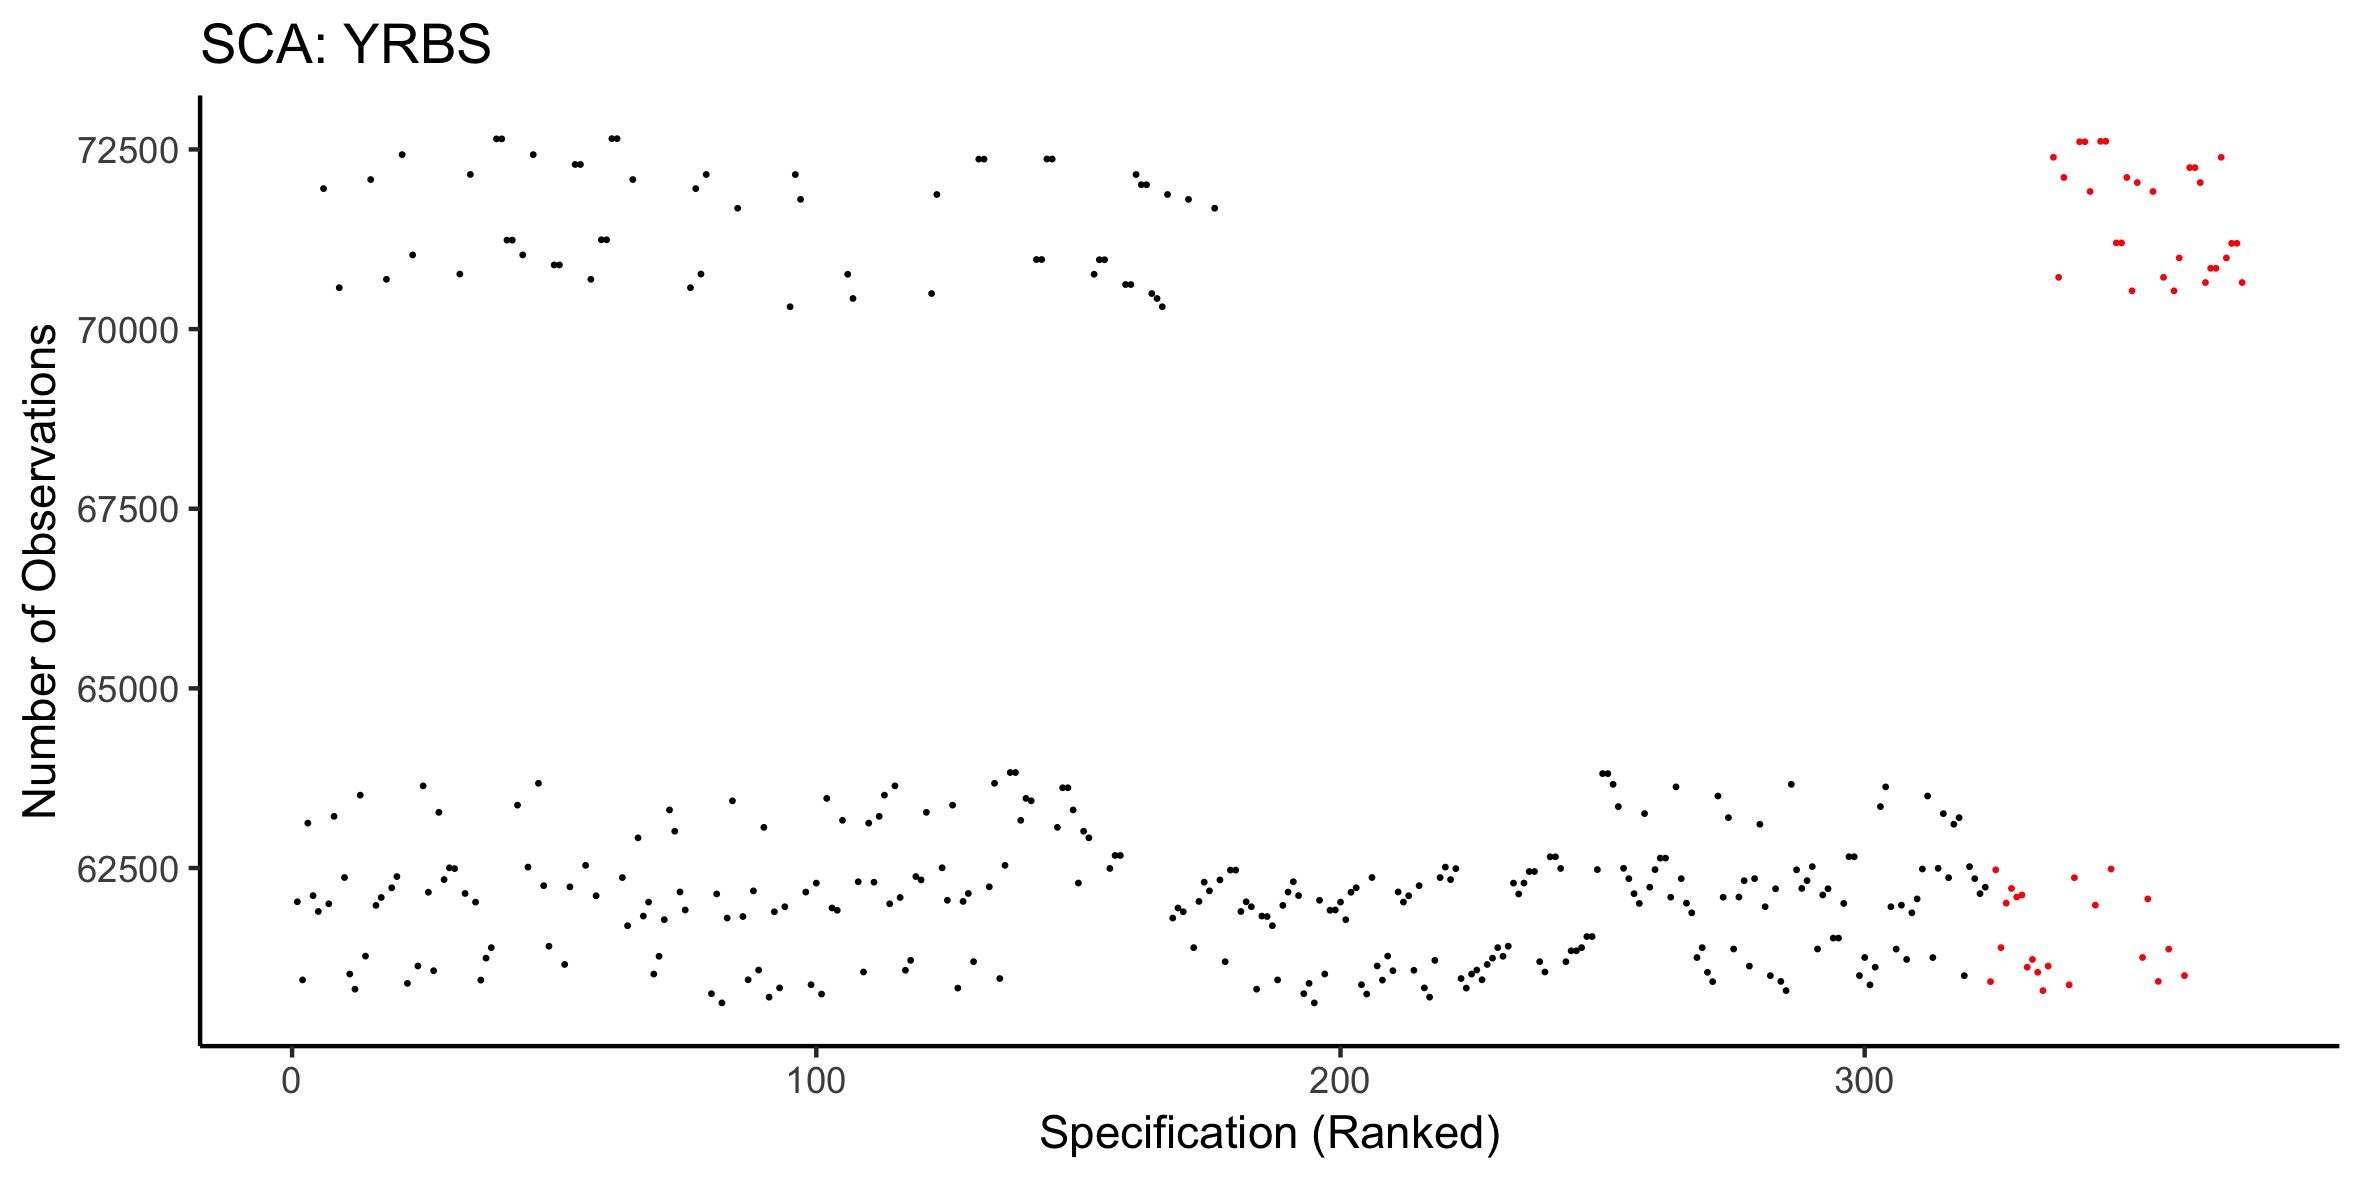 Number of observations (participants) for each specification analysed in the YRBS SCA. Red dots indicate when the specification was non-significant, while black dots show significant specifications.